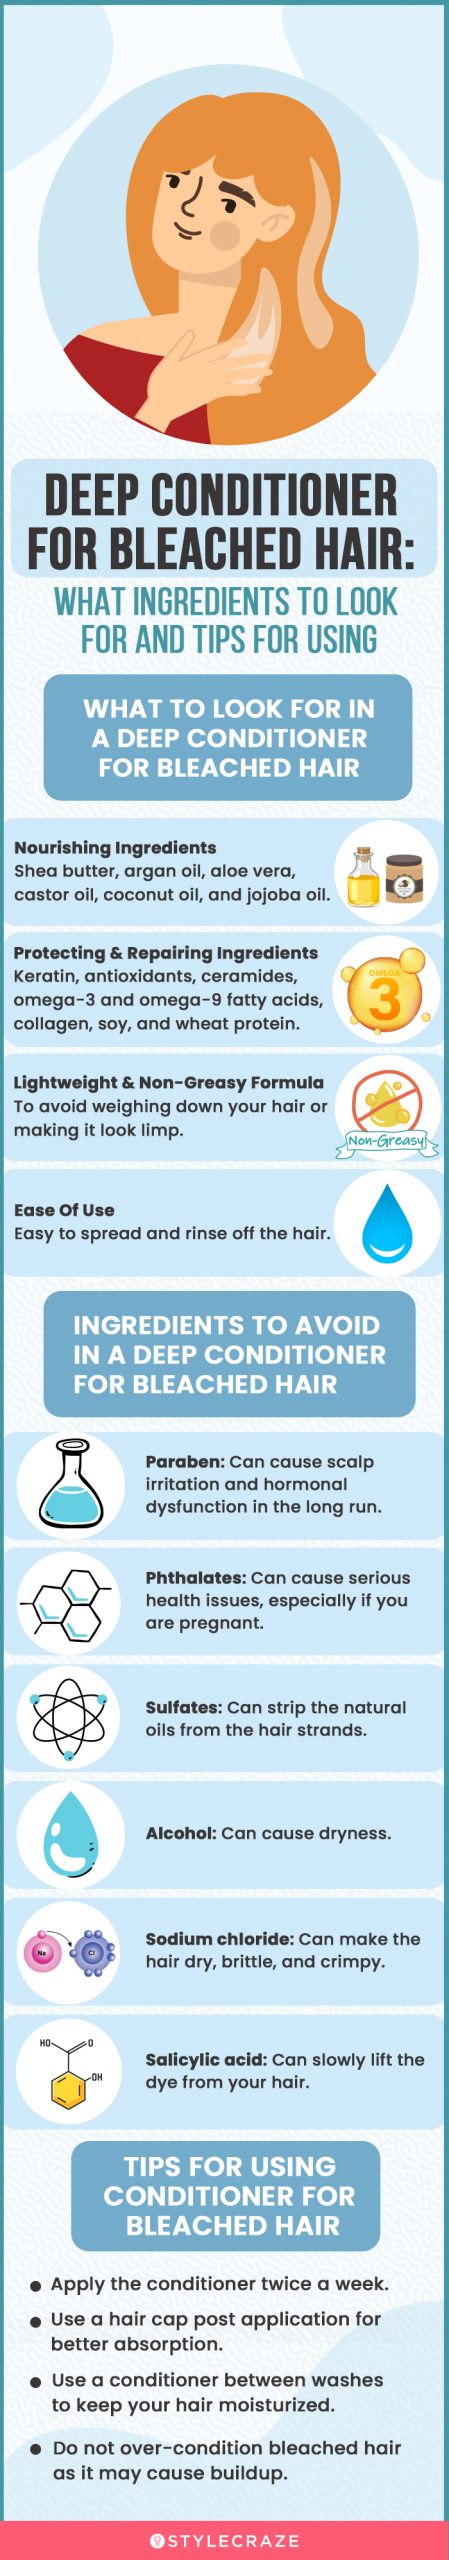 Deep Conditioner For Bleached Hair